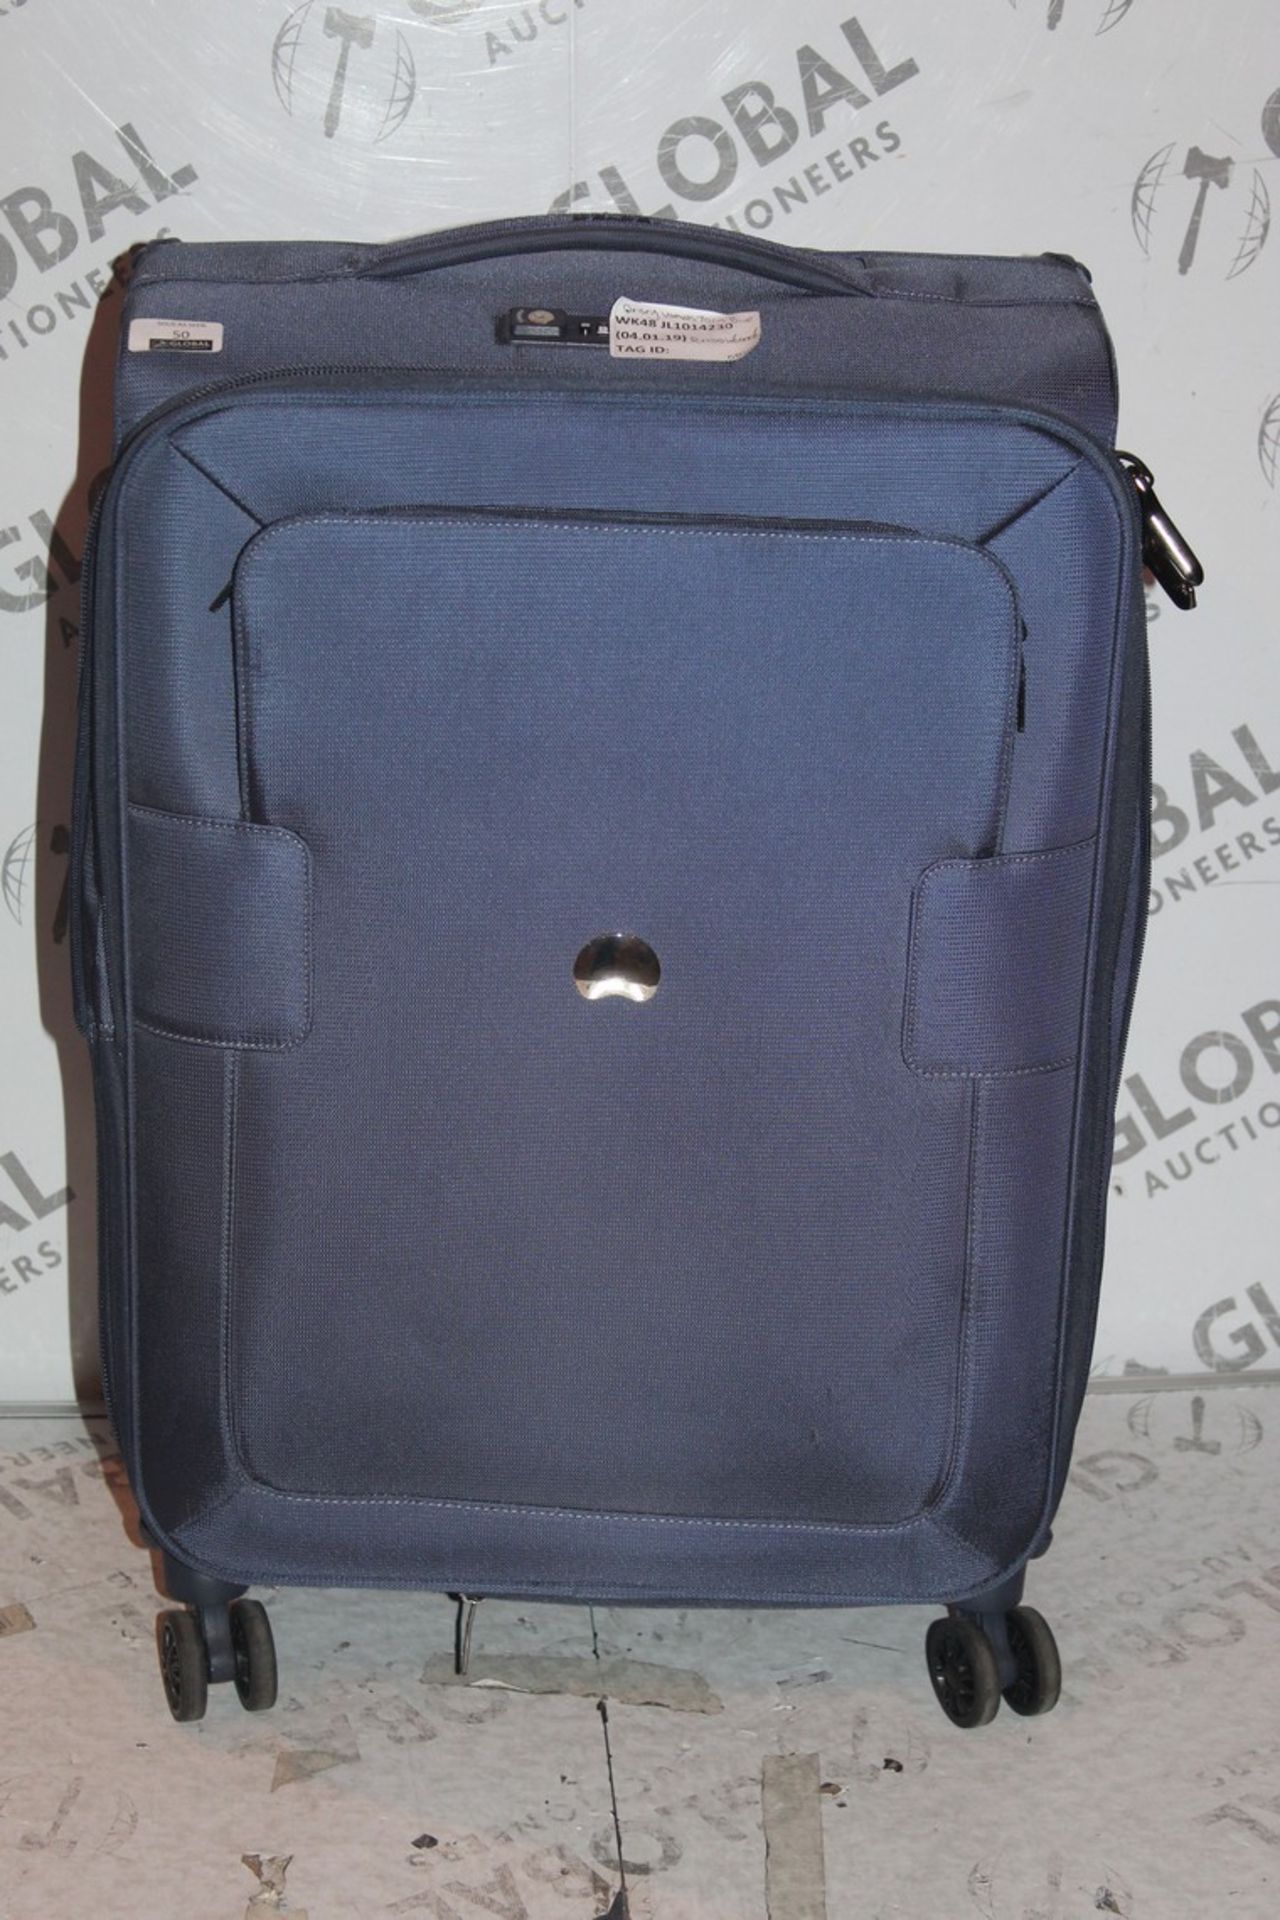 Delsey Soft Shell Medium Sized Suitcase RRP £80 (RET00460006) (Public Viewing and Appraisals